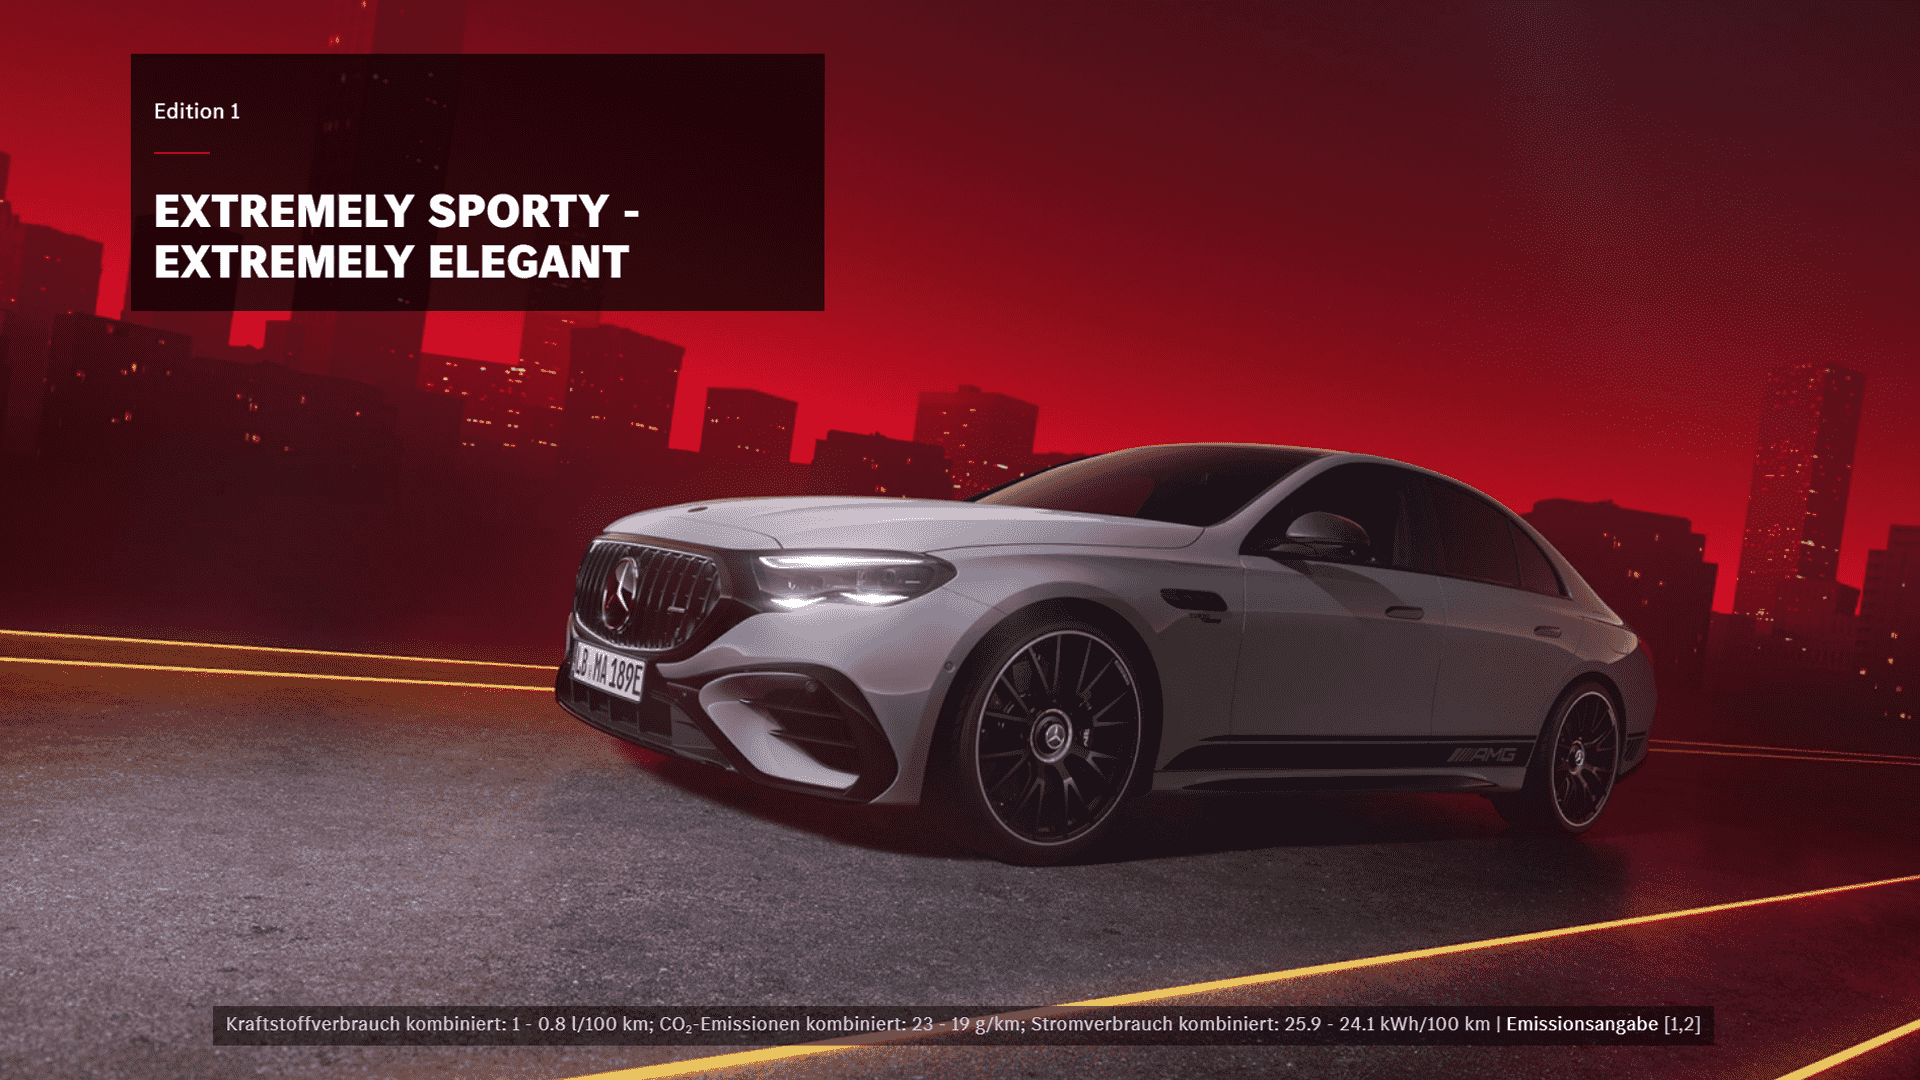 The Mercedes-AMG E 53 Hybrid Edition 1 Special-Edition Model